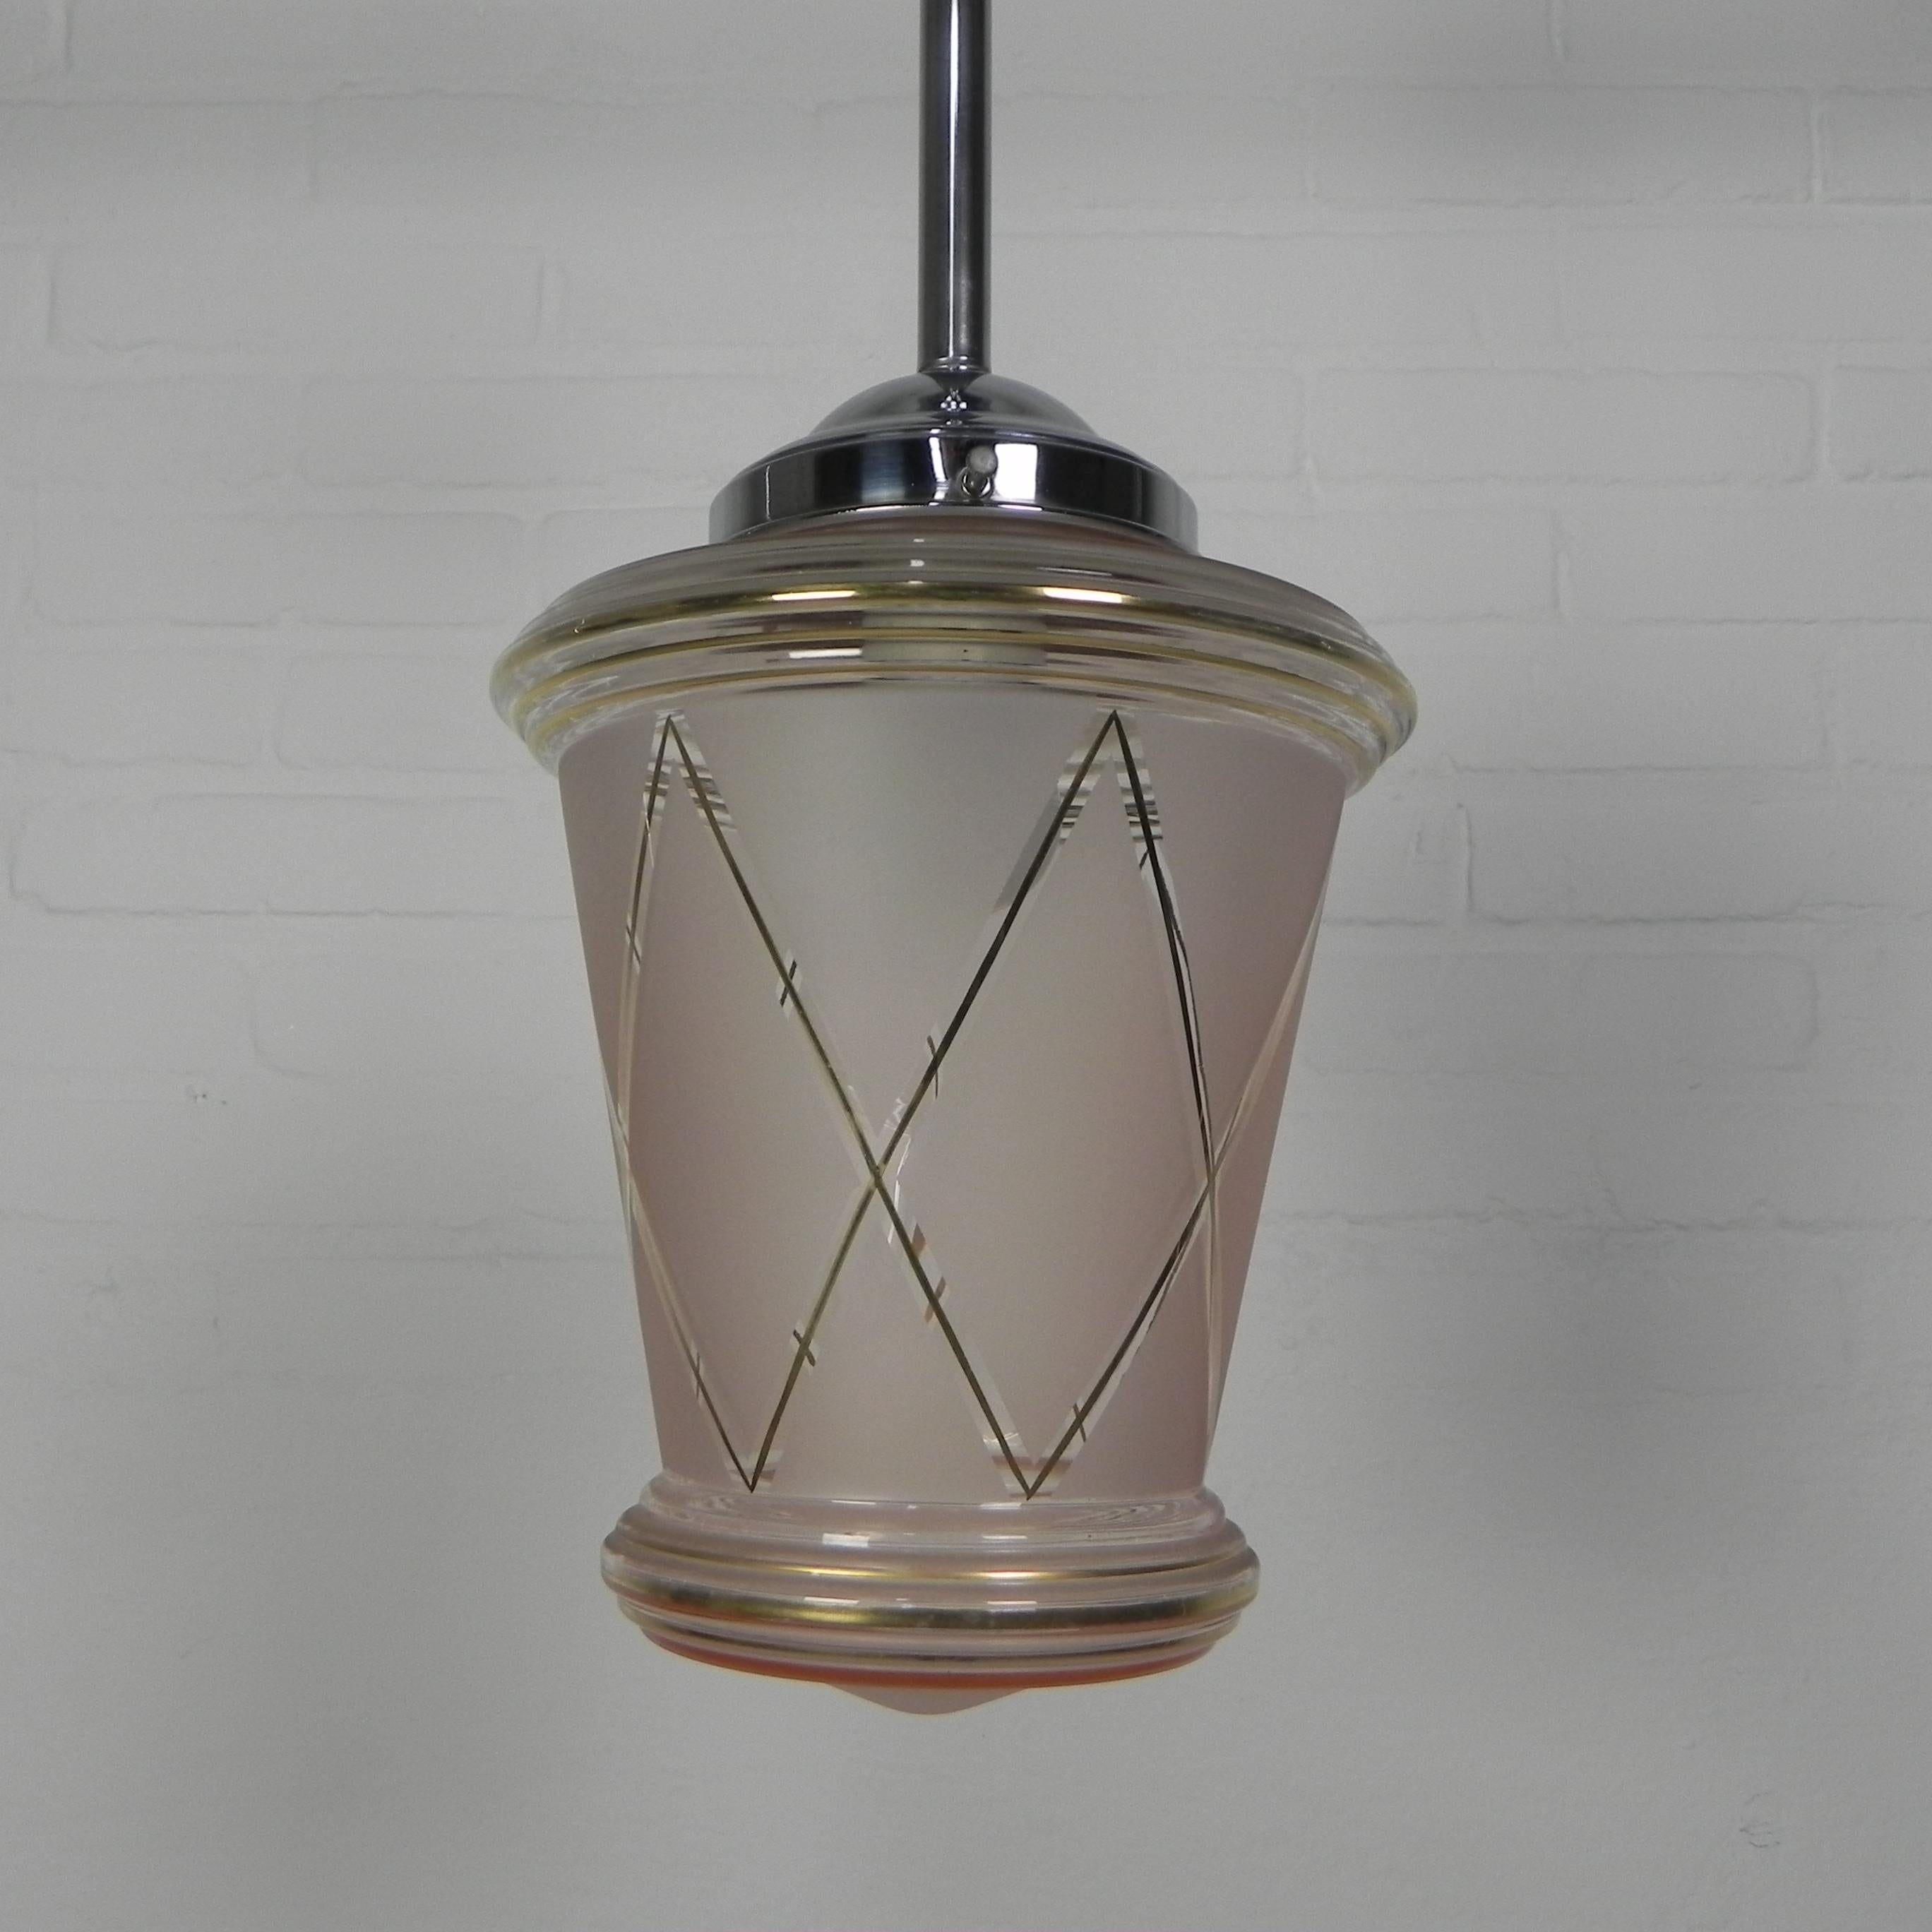 Height: 49 cm.
Ø: 19 cm.
Shade height: 22 cm.
The lamp has a new wire
and large bulb holder (E27).
The top cover has a small chip in the edge.
Origin: France, 1930s.
Material: glass / chrome-plated brass.
All our lamps are suitable for LED lamps.